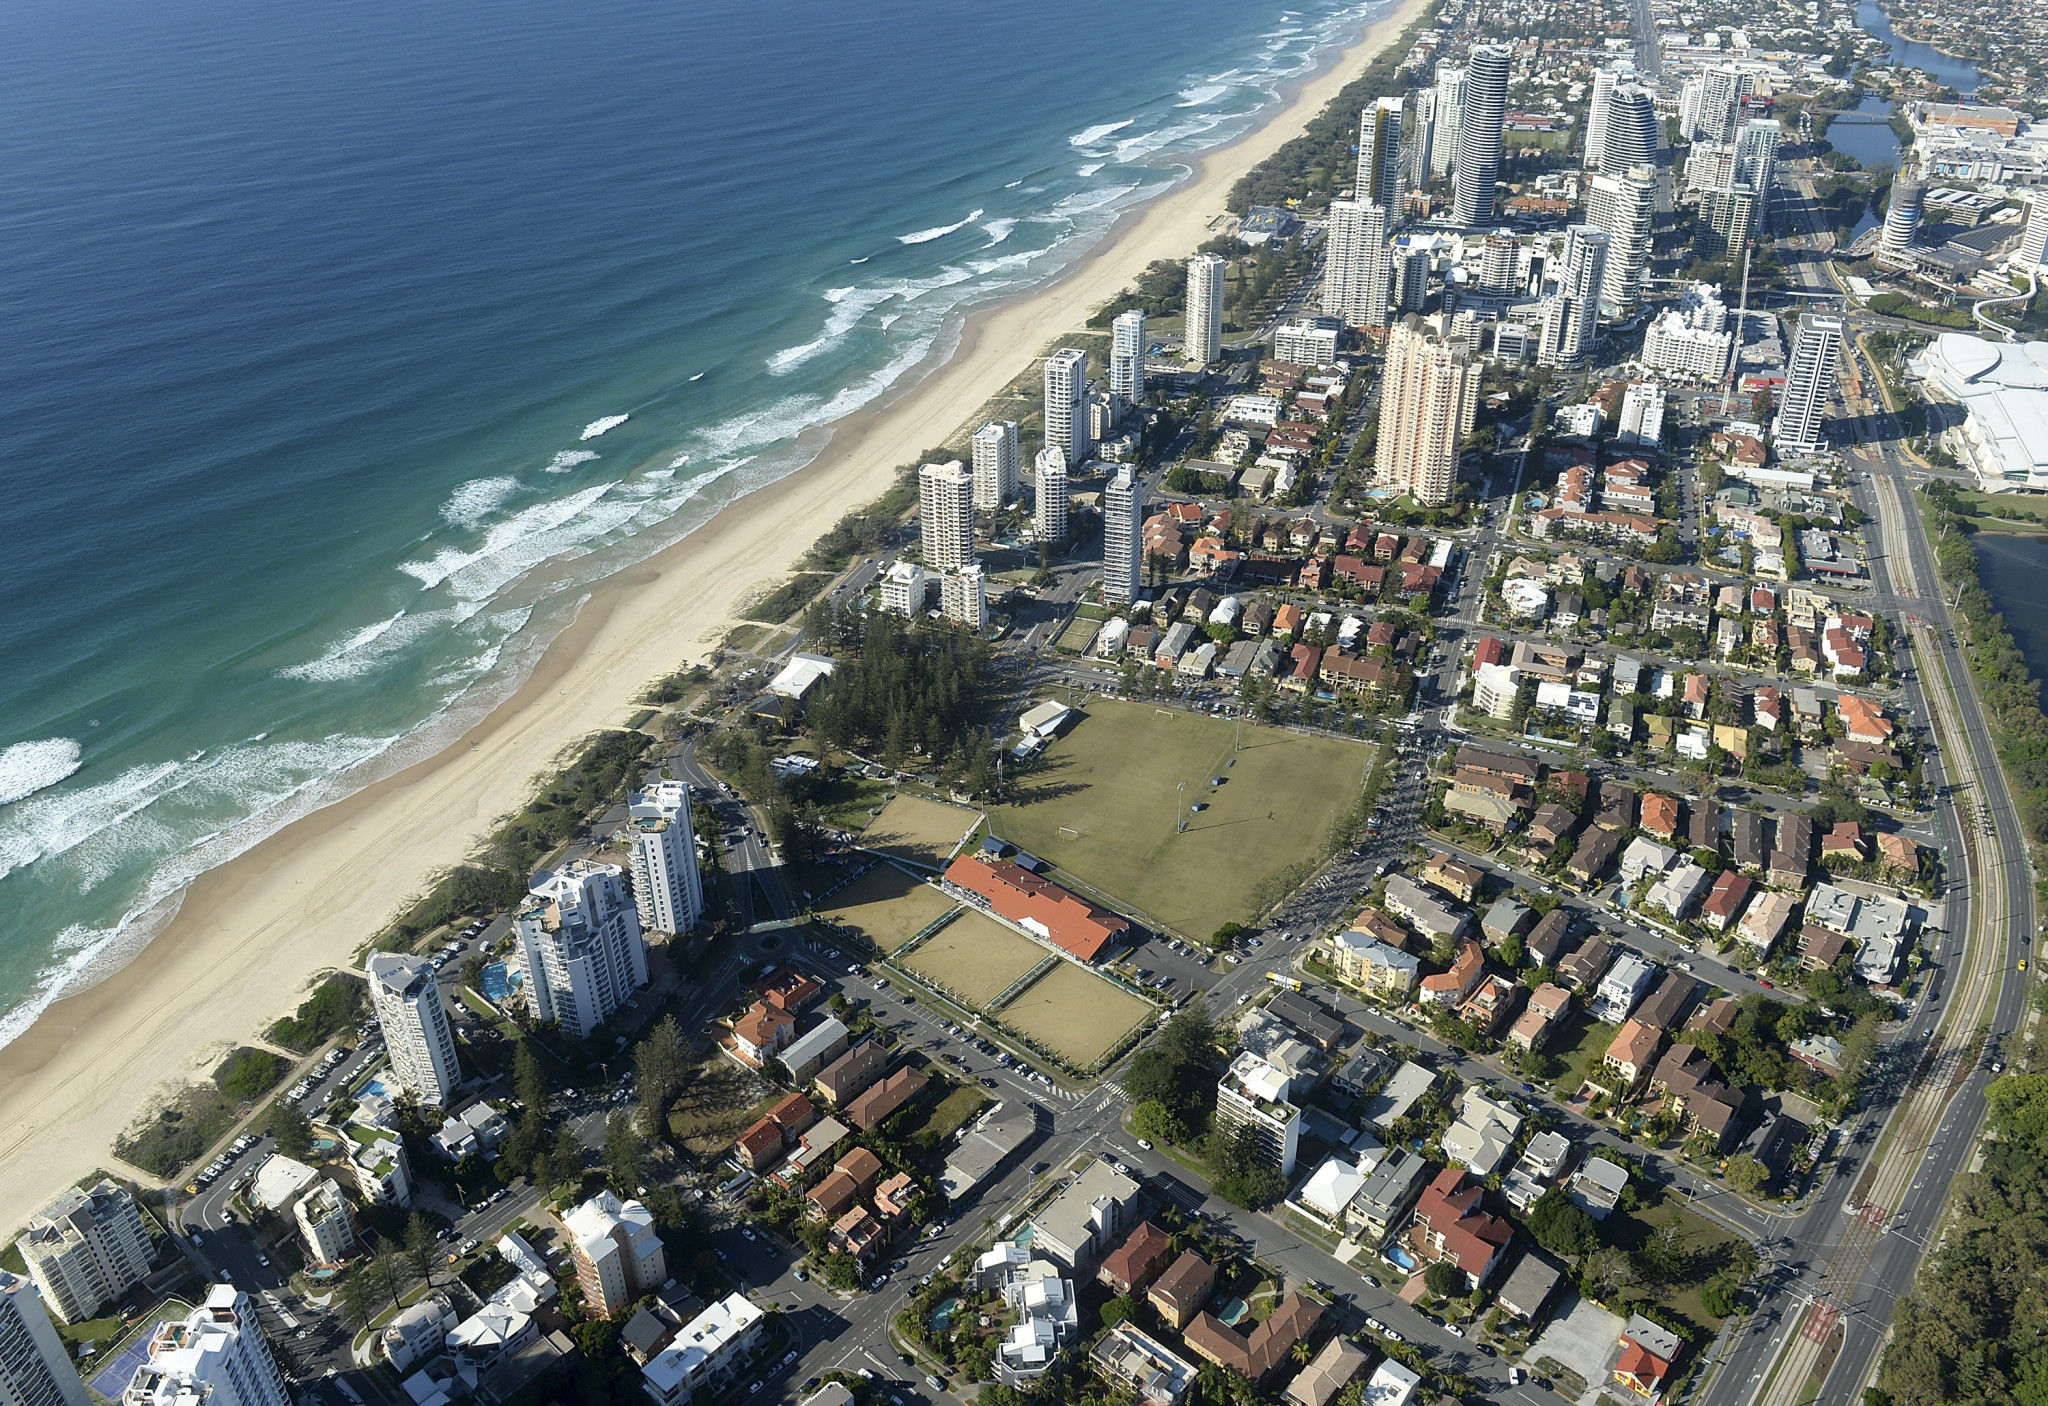 Defence helicopters and aircraft are set to conduct flights over Gold Coast prior to the Games to ensure they can operate safely in built up areas ©Getty Images